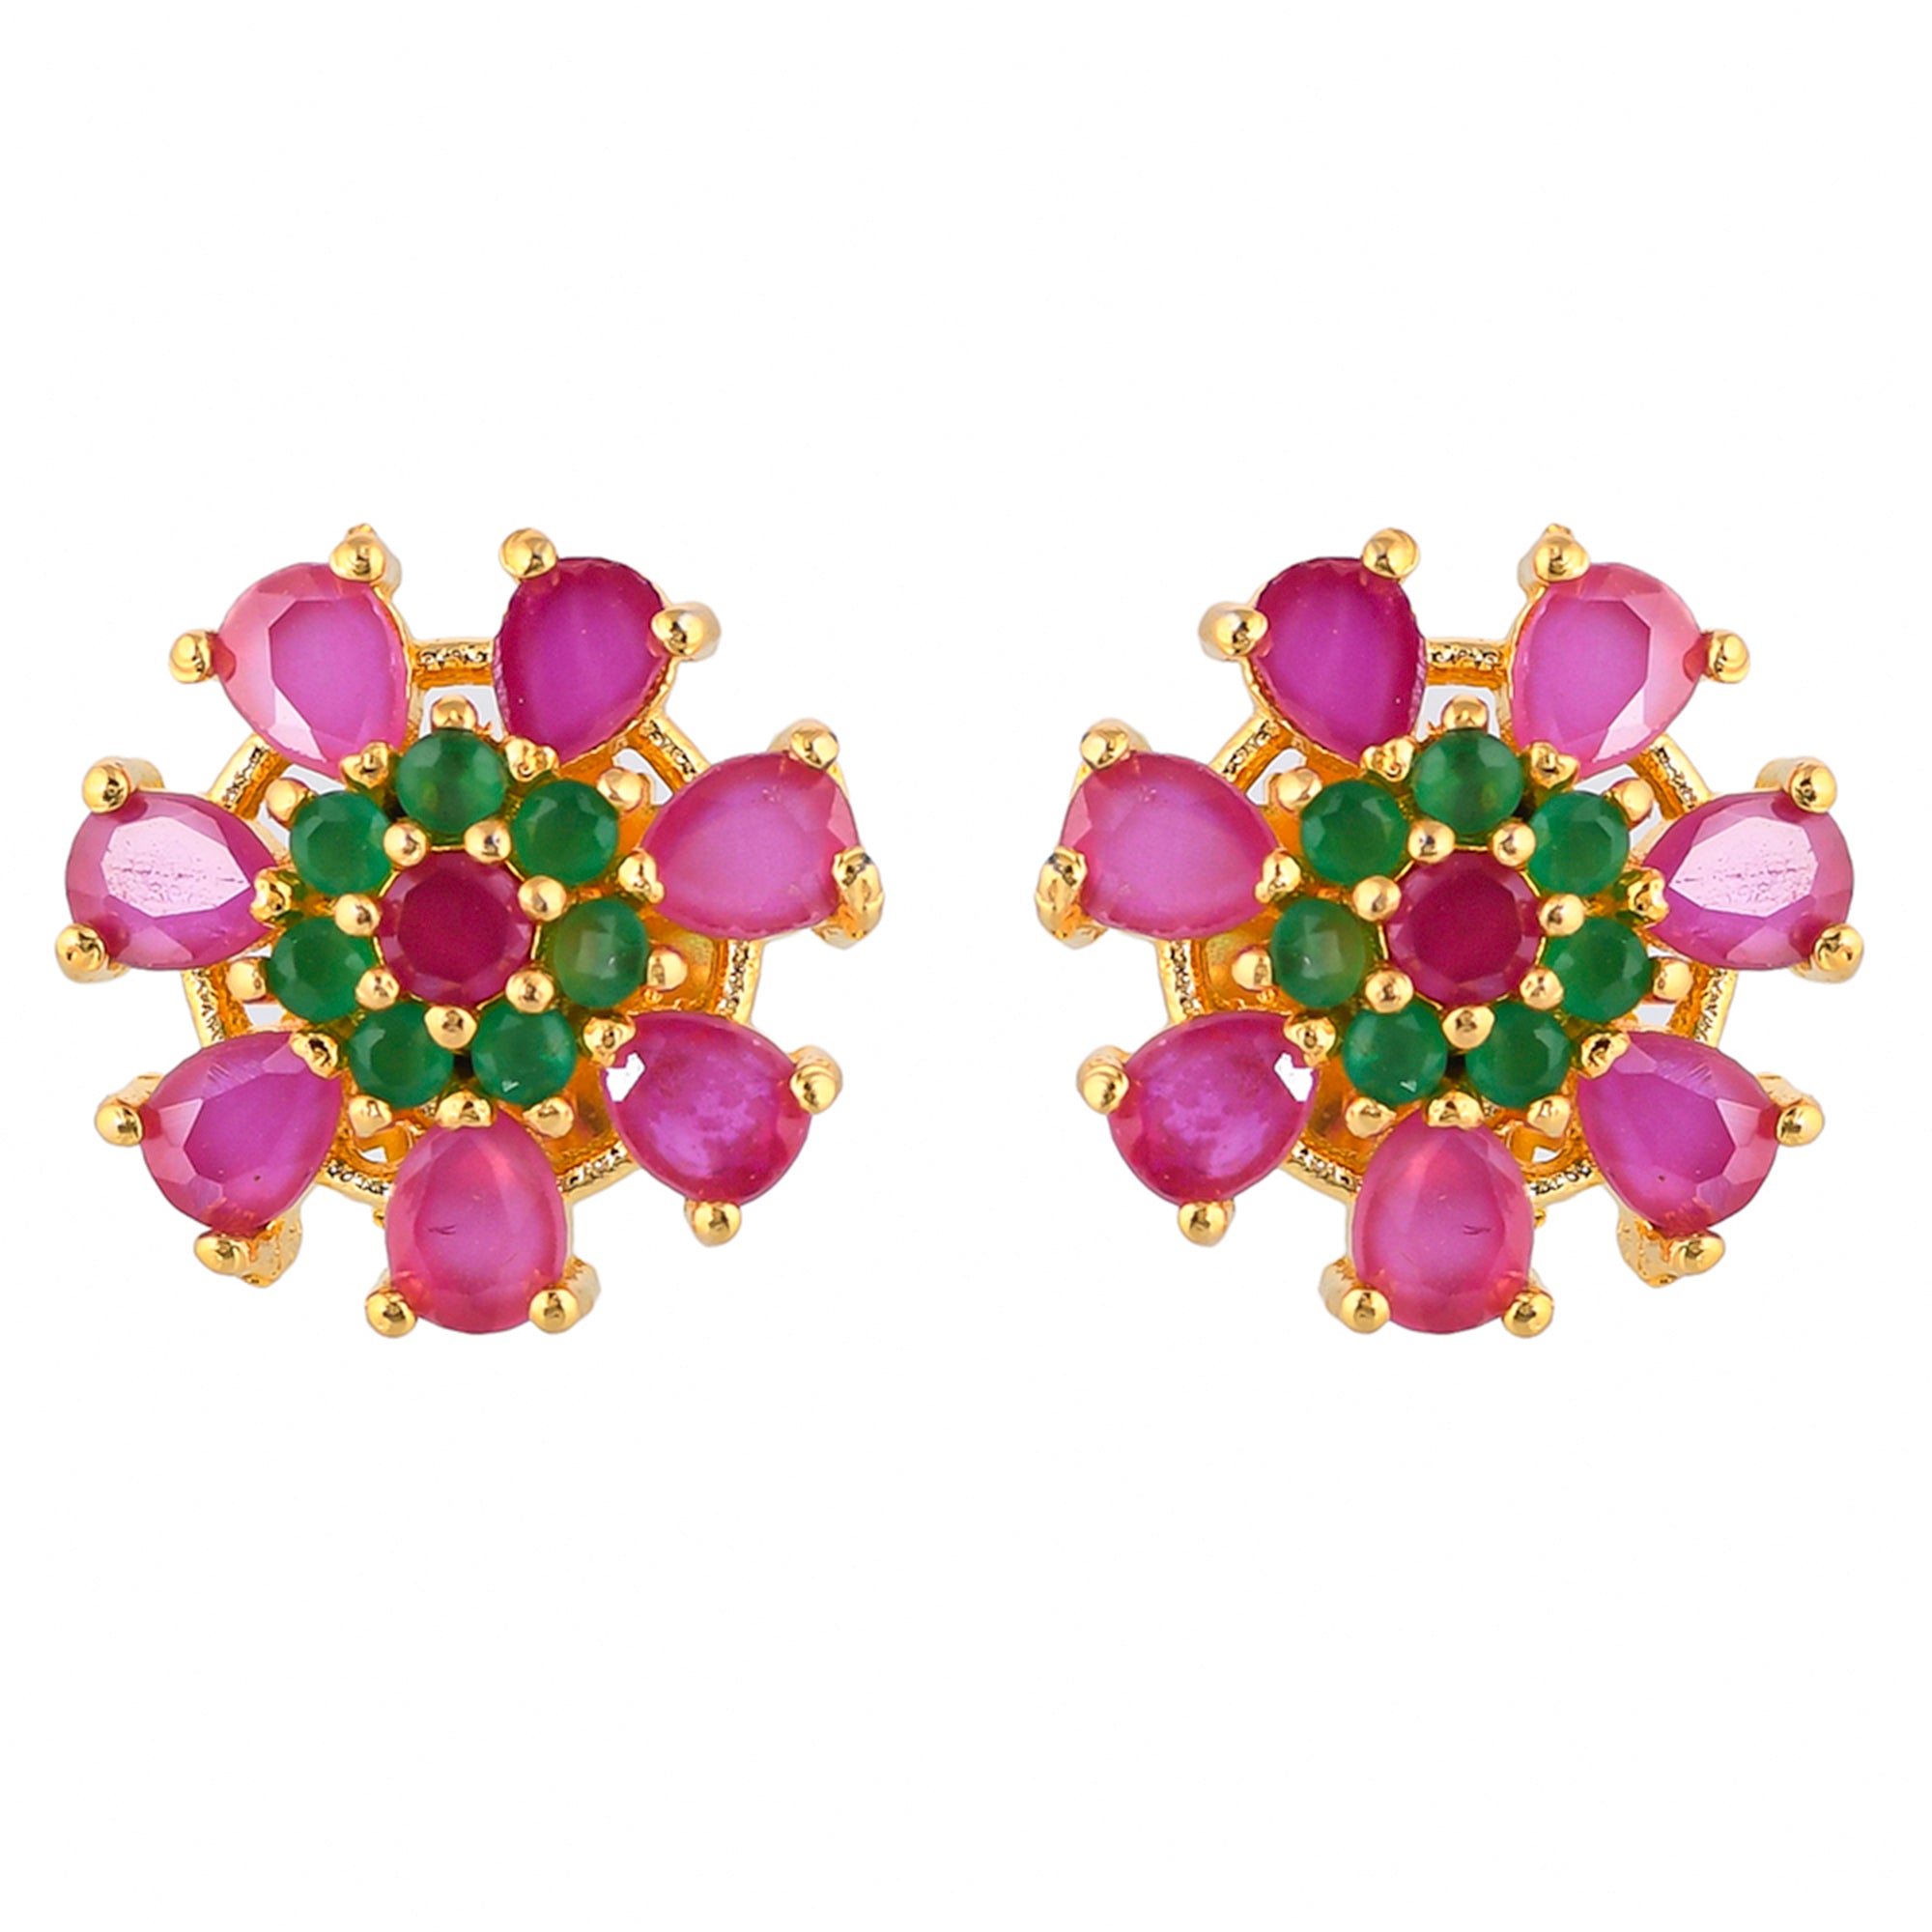 Tiny Pink and Green CZ Gems Stud Earrings